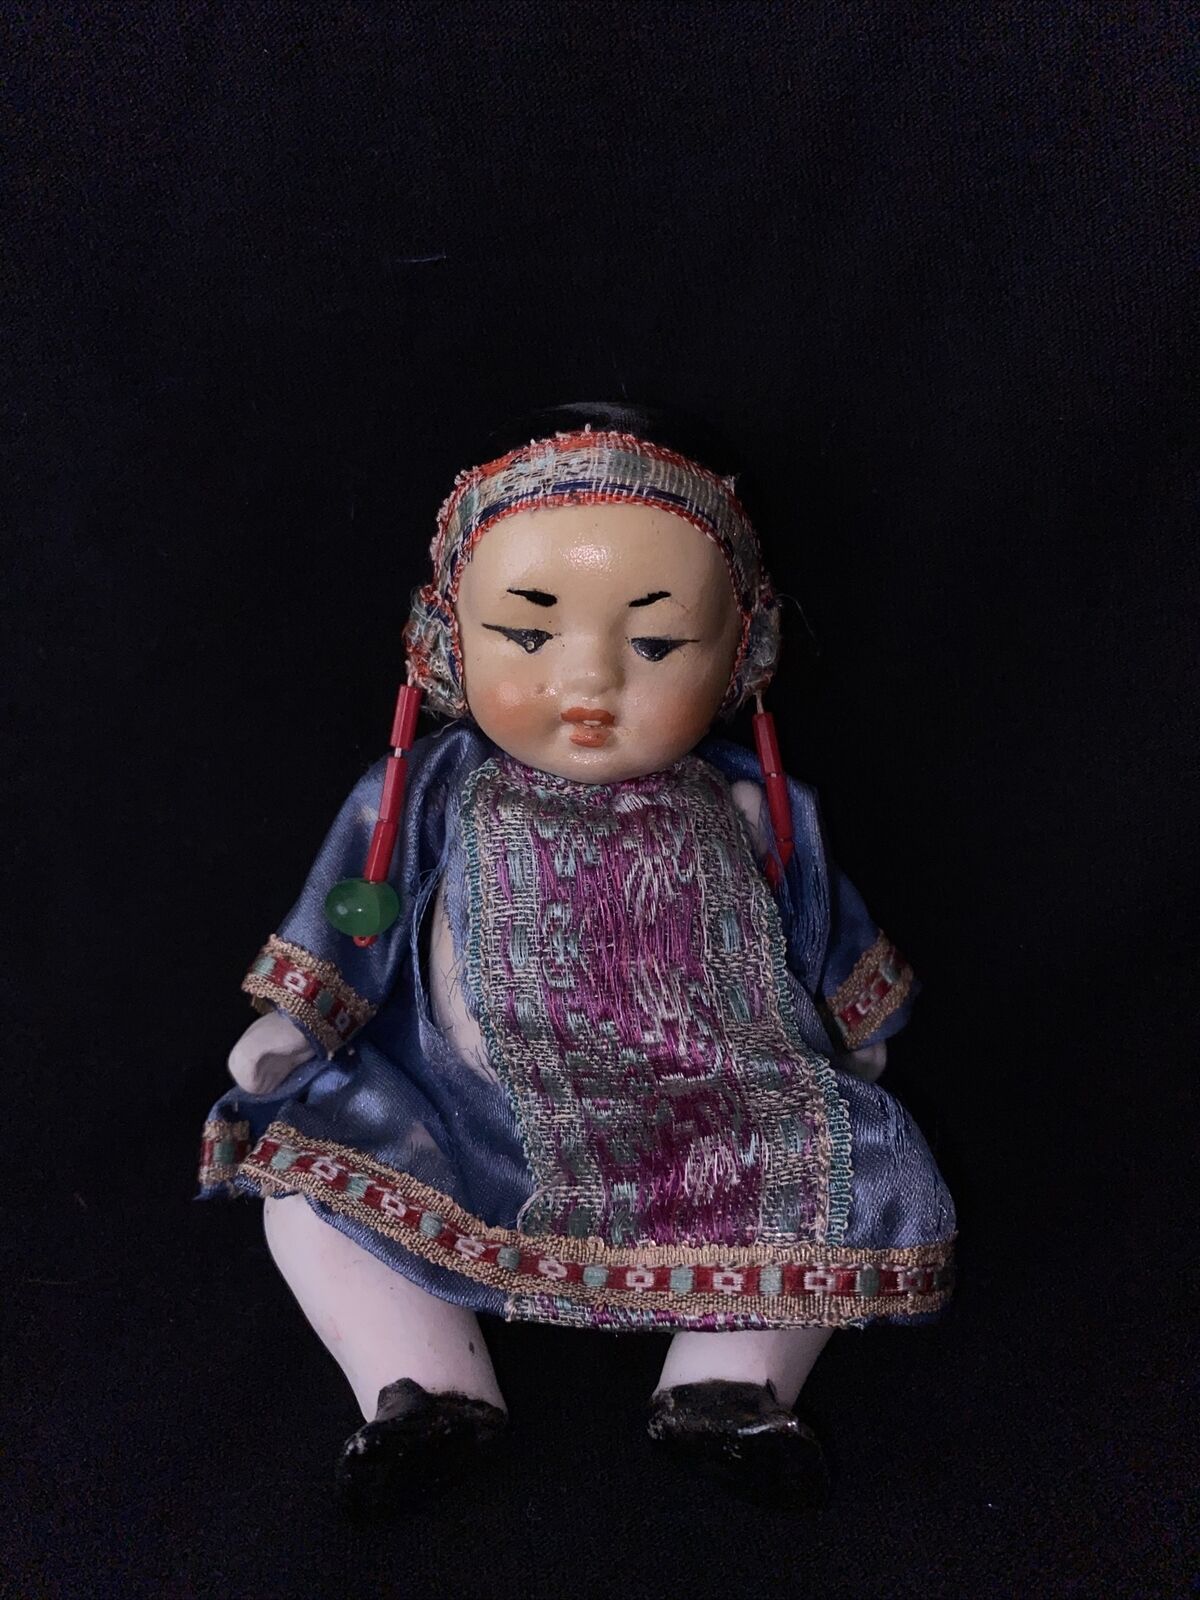 VERY RARE STUNNING VINTAGE MING MING ASIAN PORCELAIN DOLL  FROM 1930’s - 1960’s